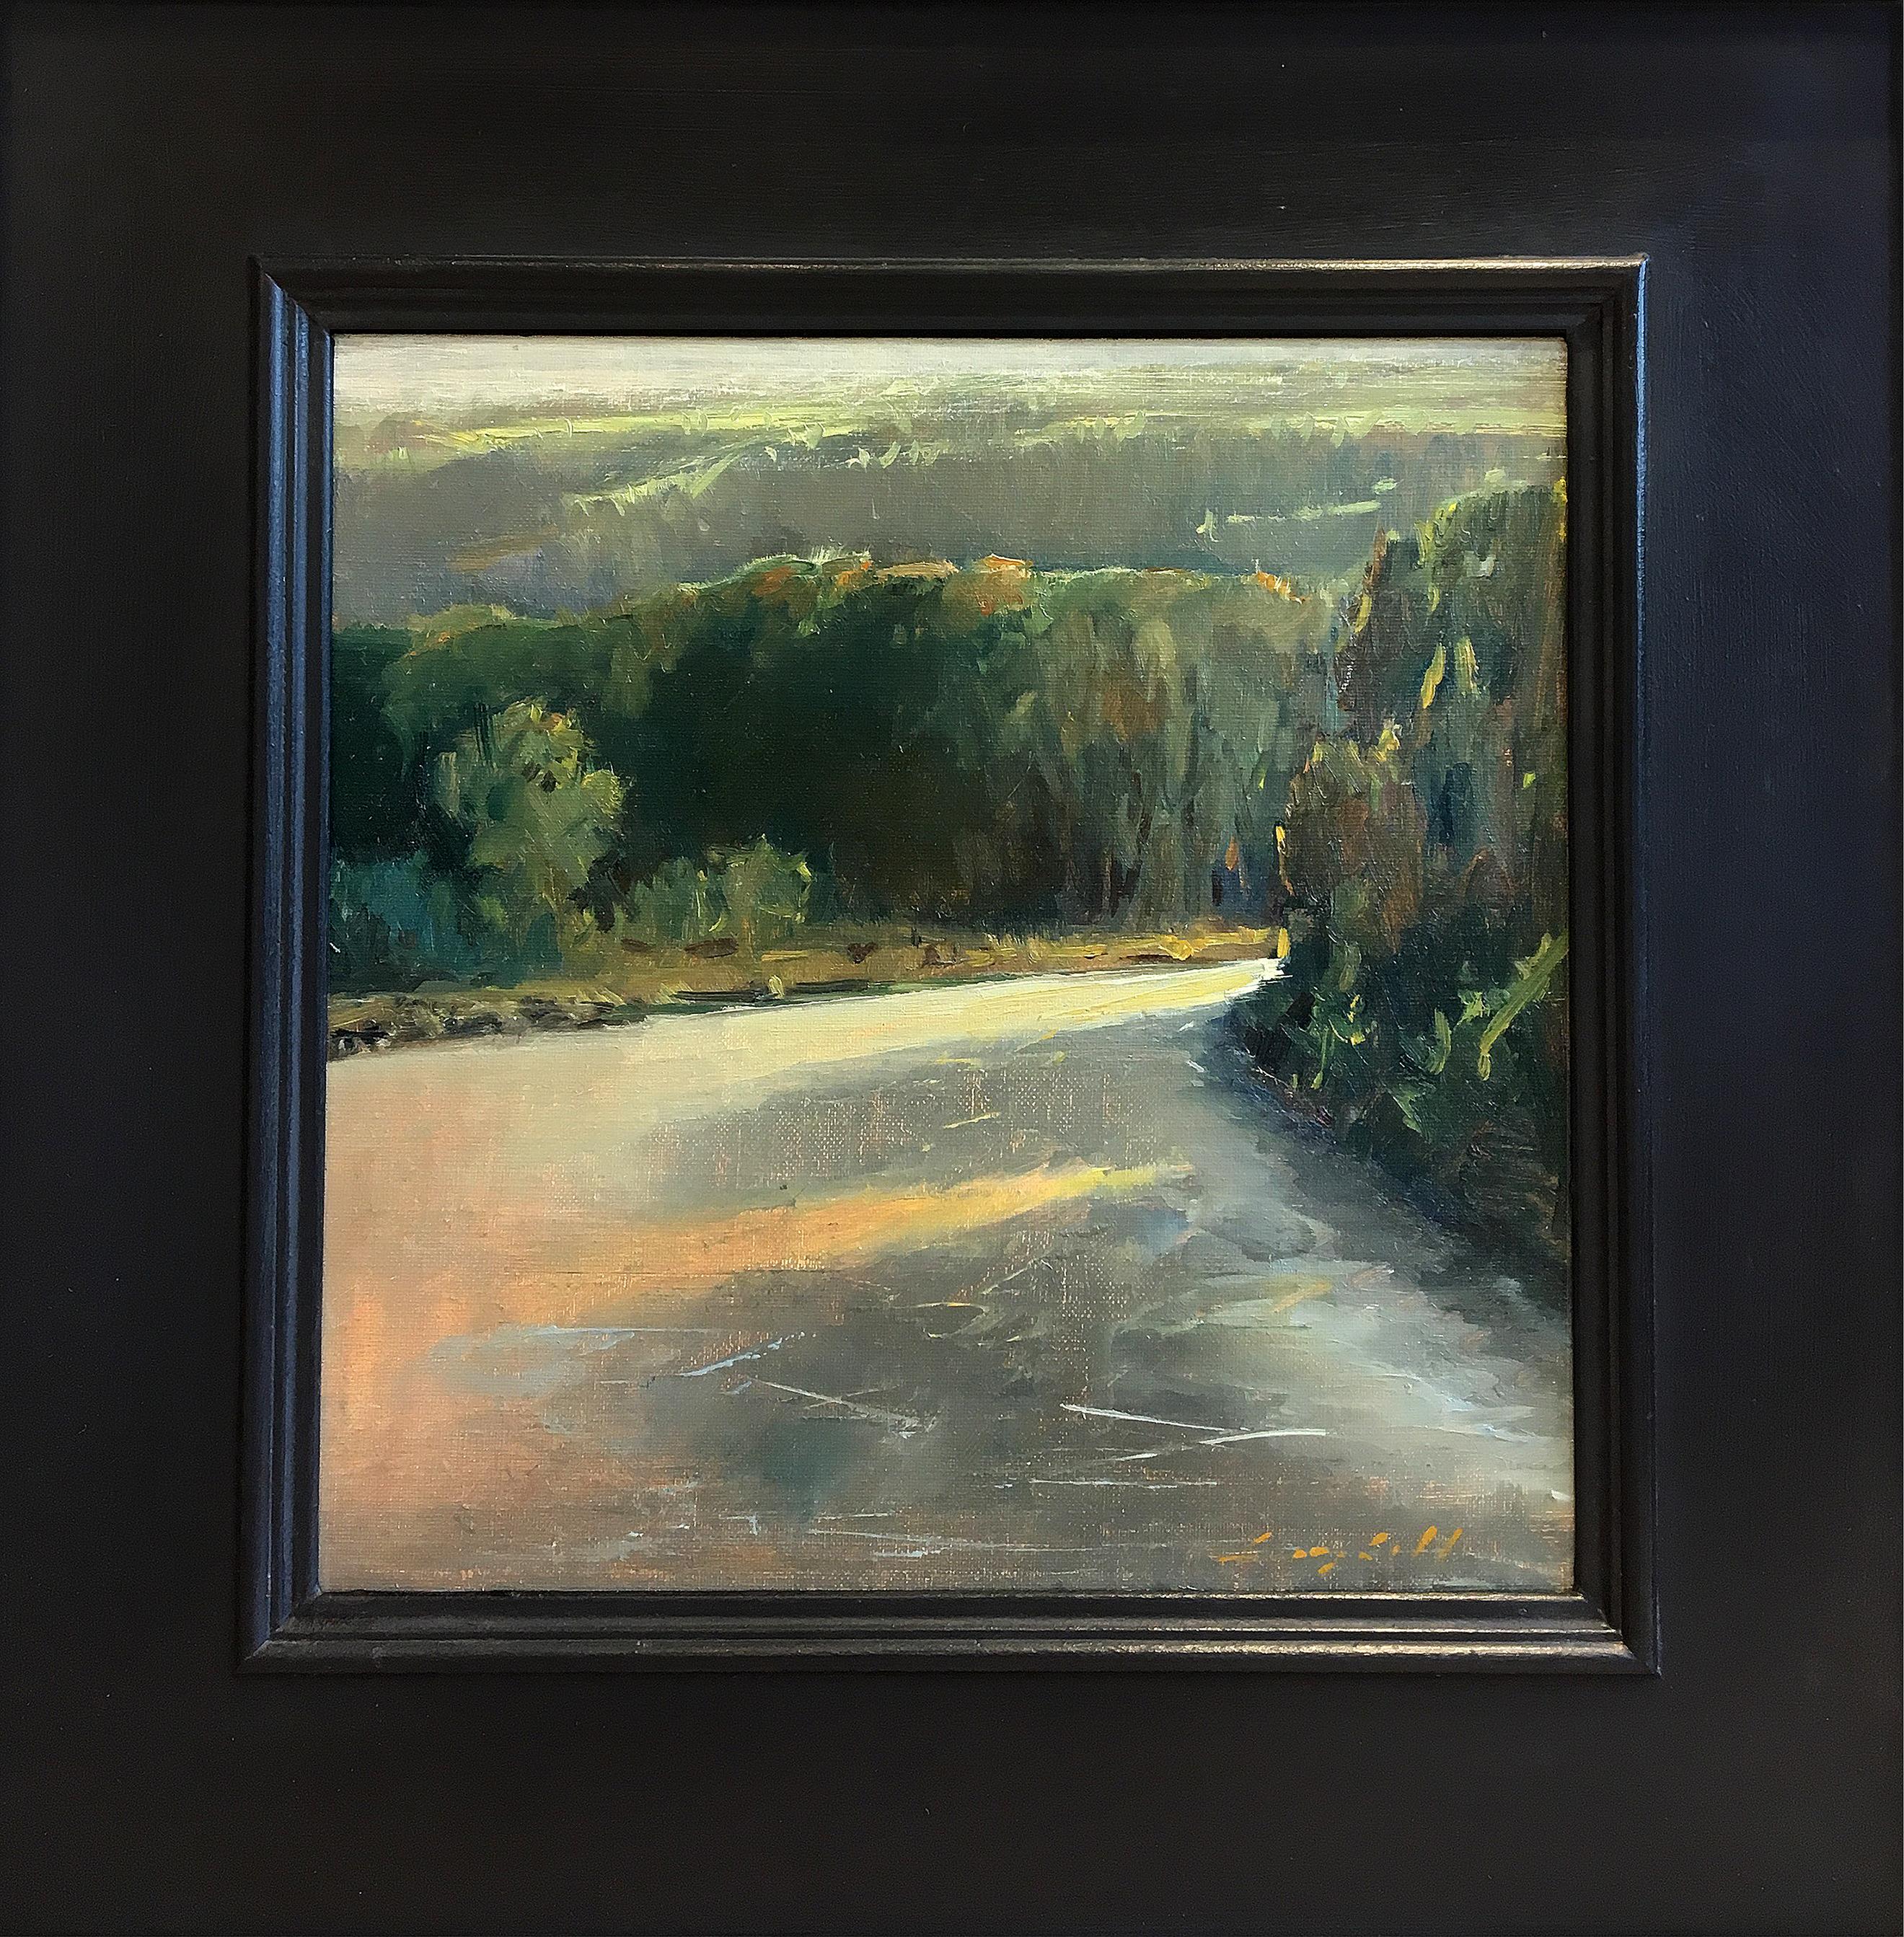 Peter Campbell Landscape Painting - Animas Afternoon (river, reflections, lush landscape)